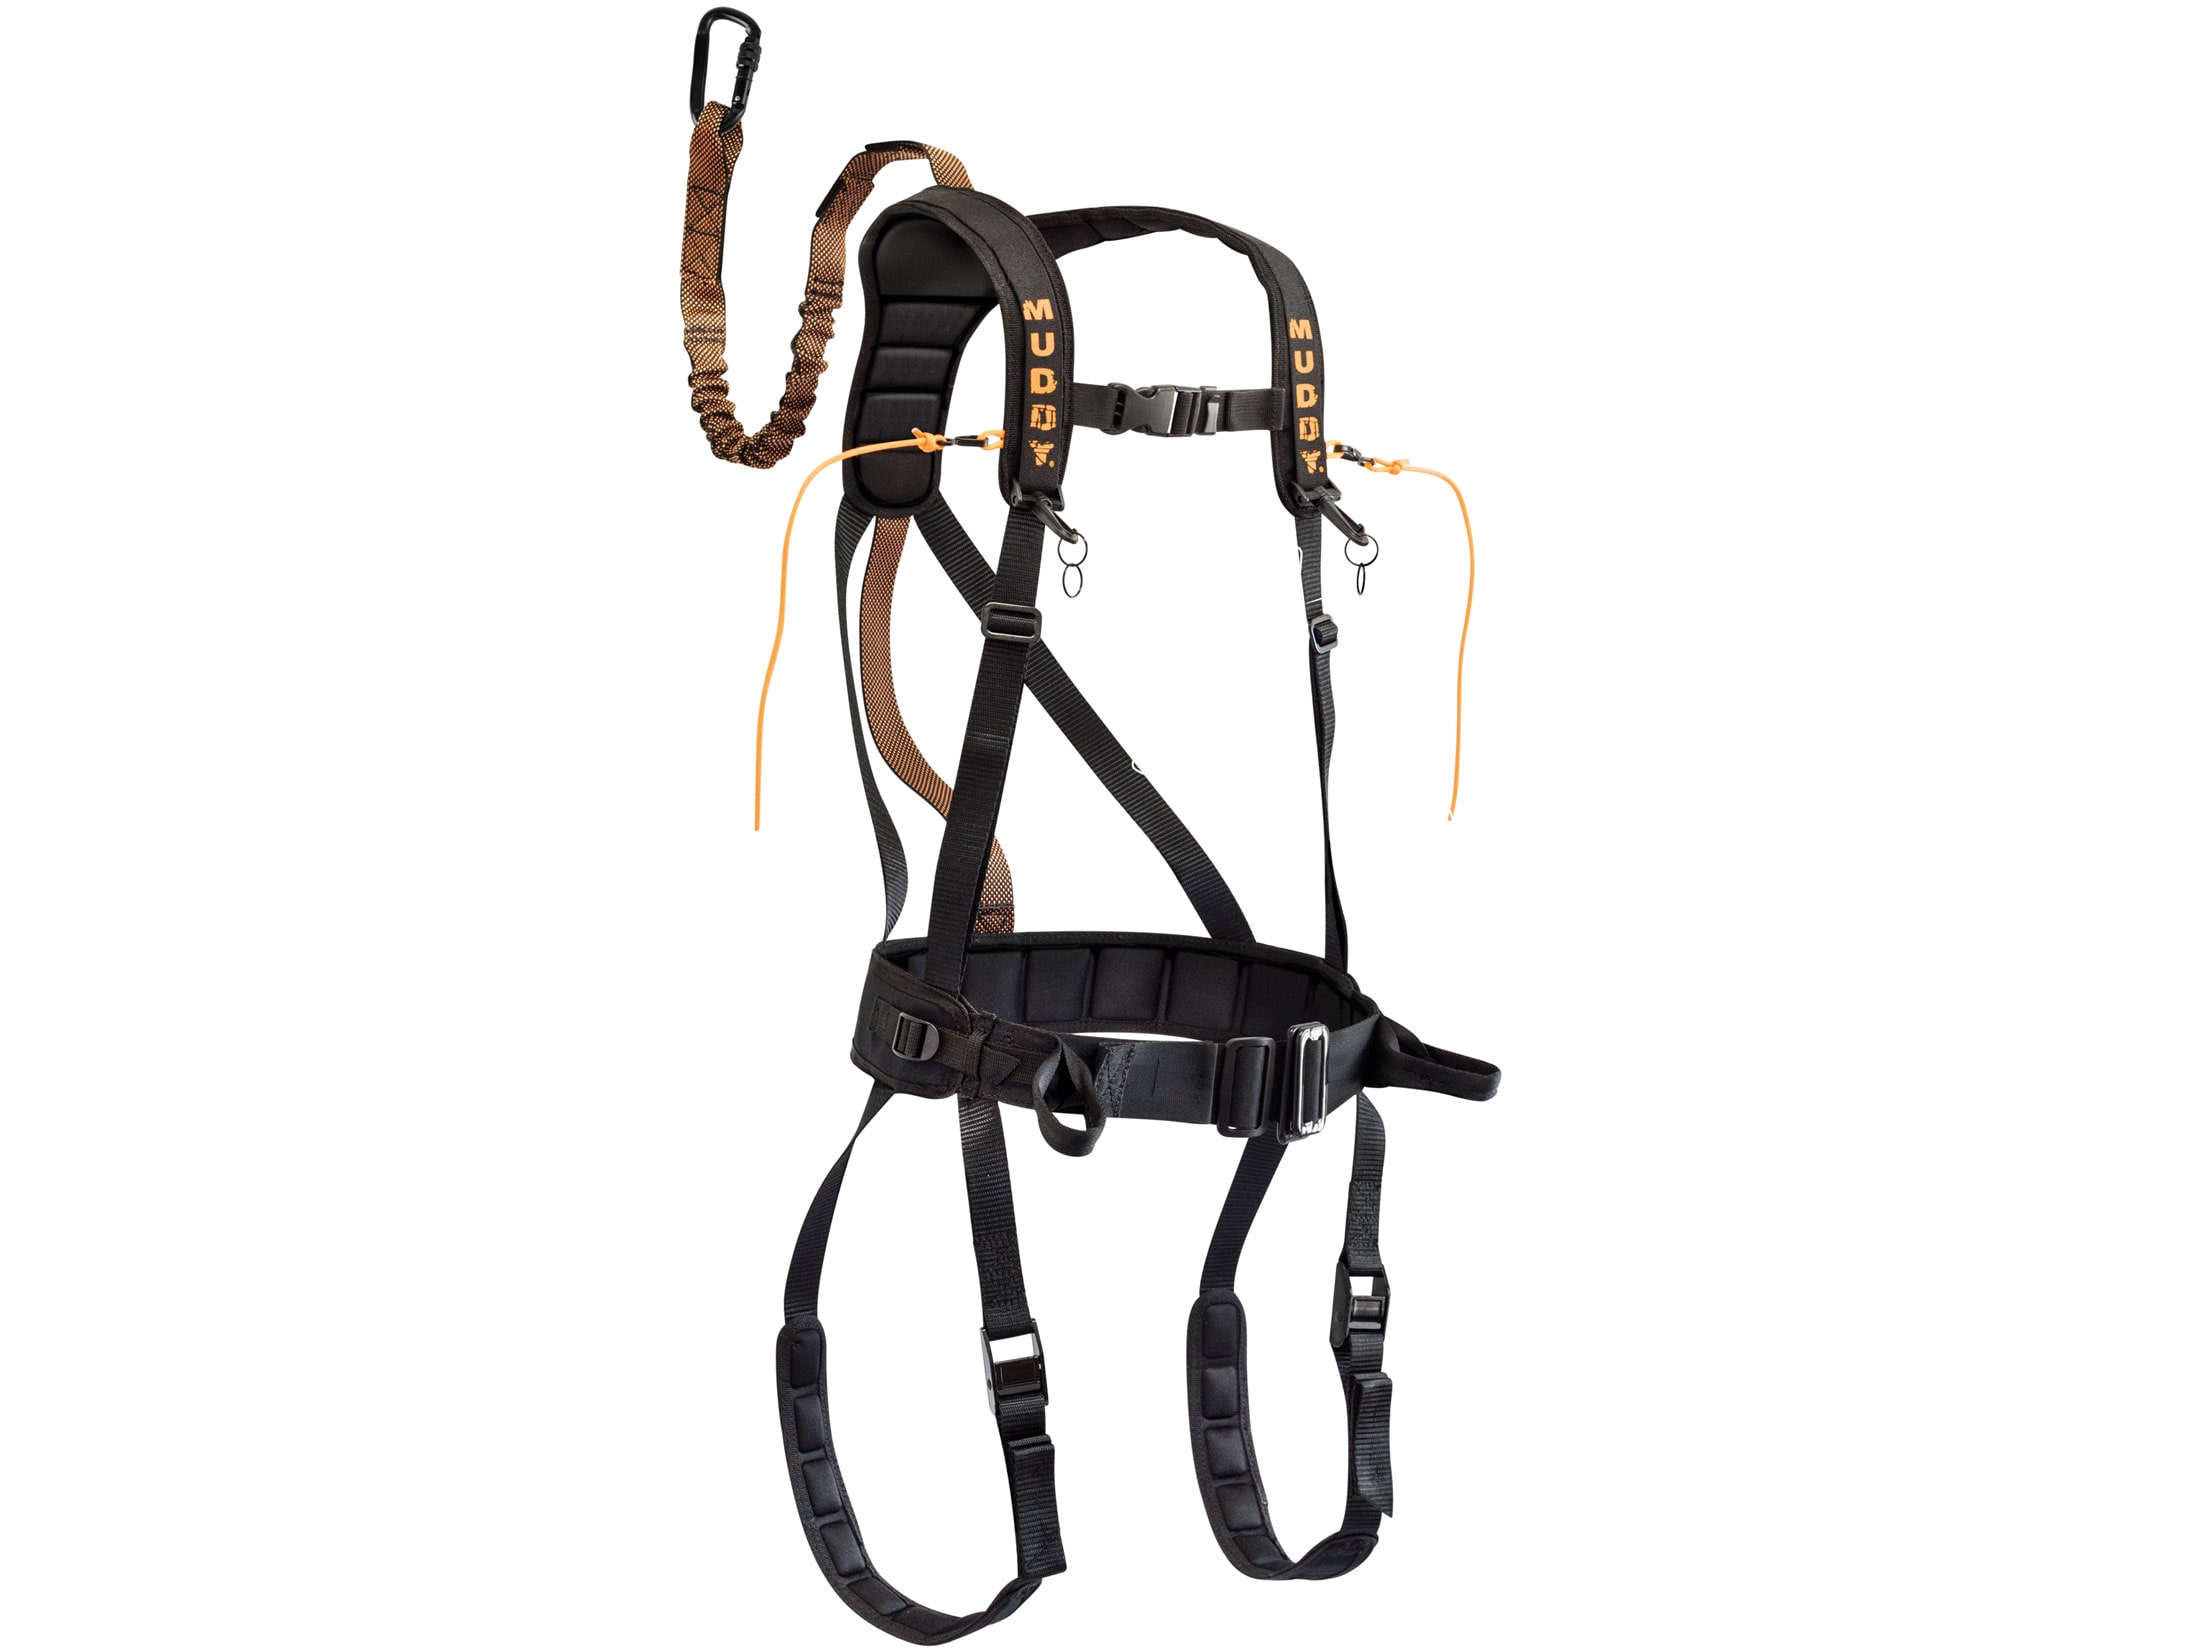 Muddy Outdoors The Safeguard Treestand Safety Harness Nylon Black S/M